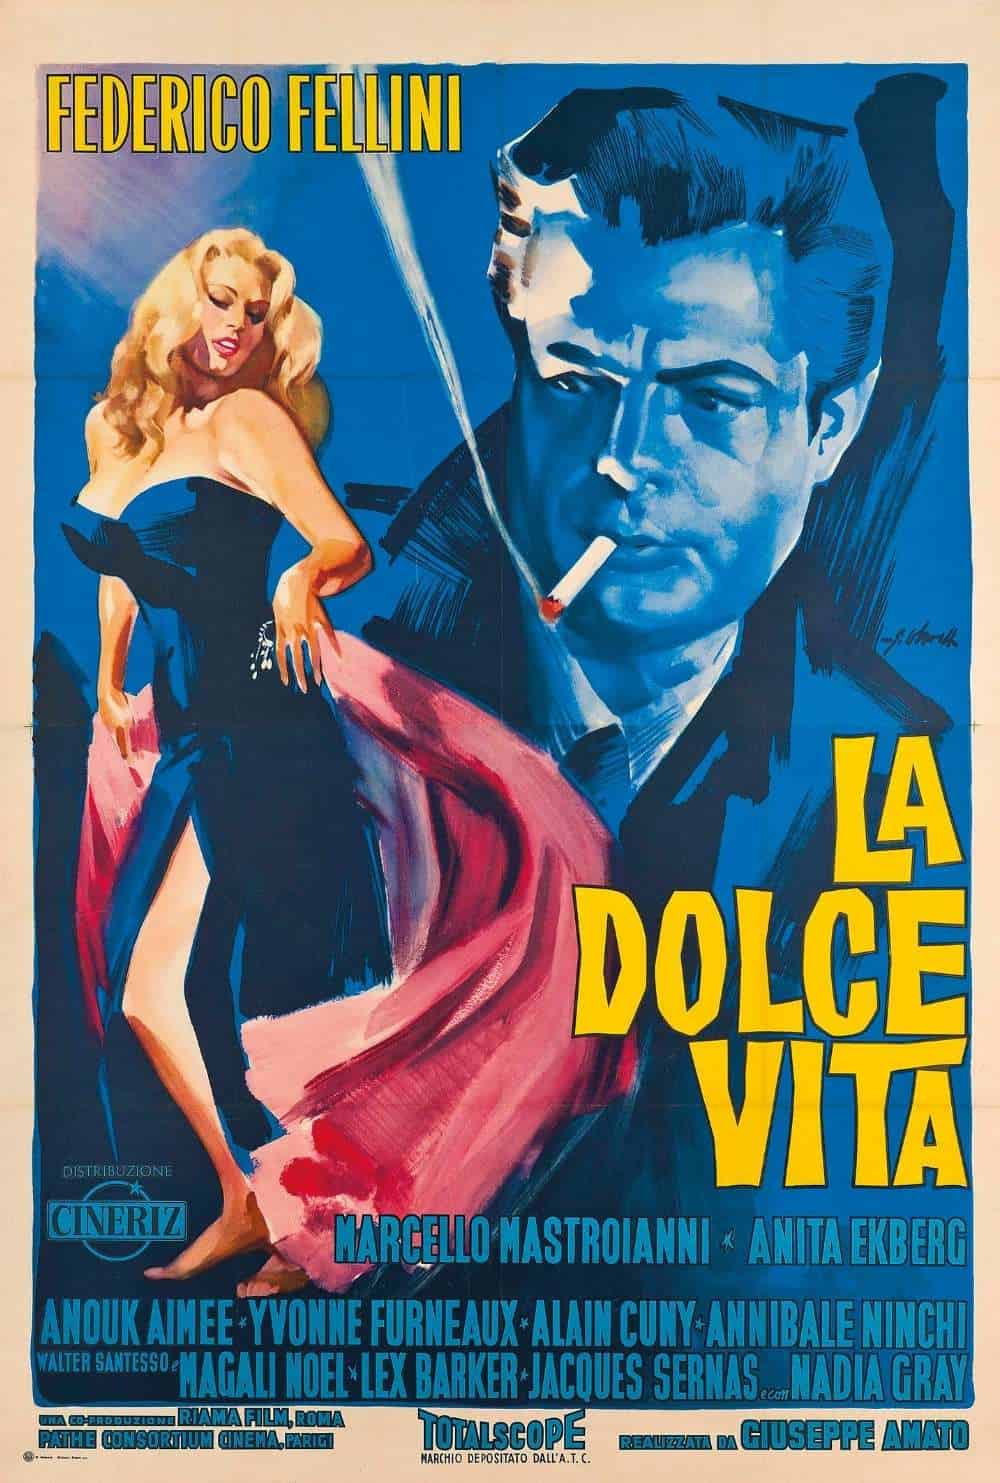 La Dolce Vita (1960) Best Movies About Rome to Watch and Re-Watch